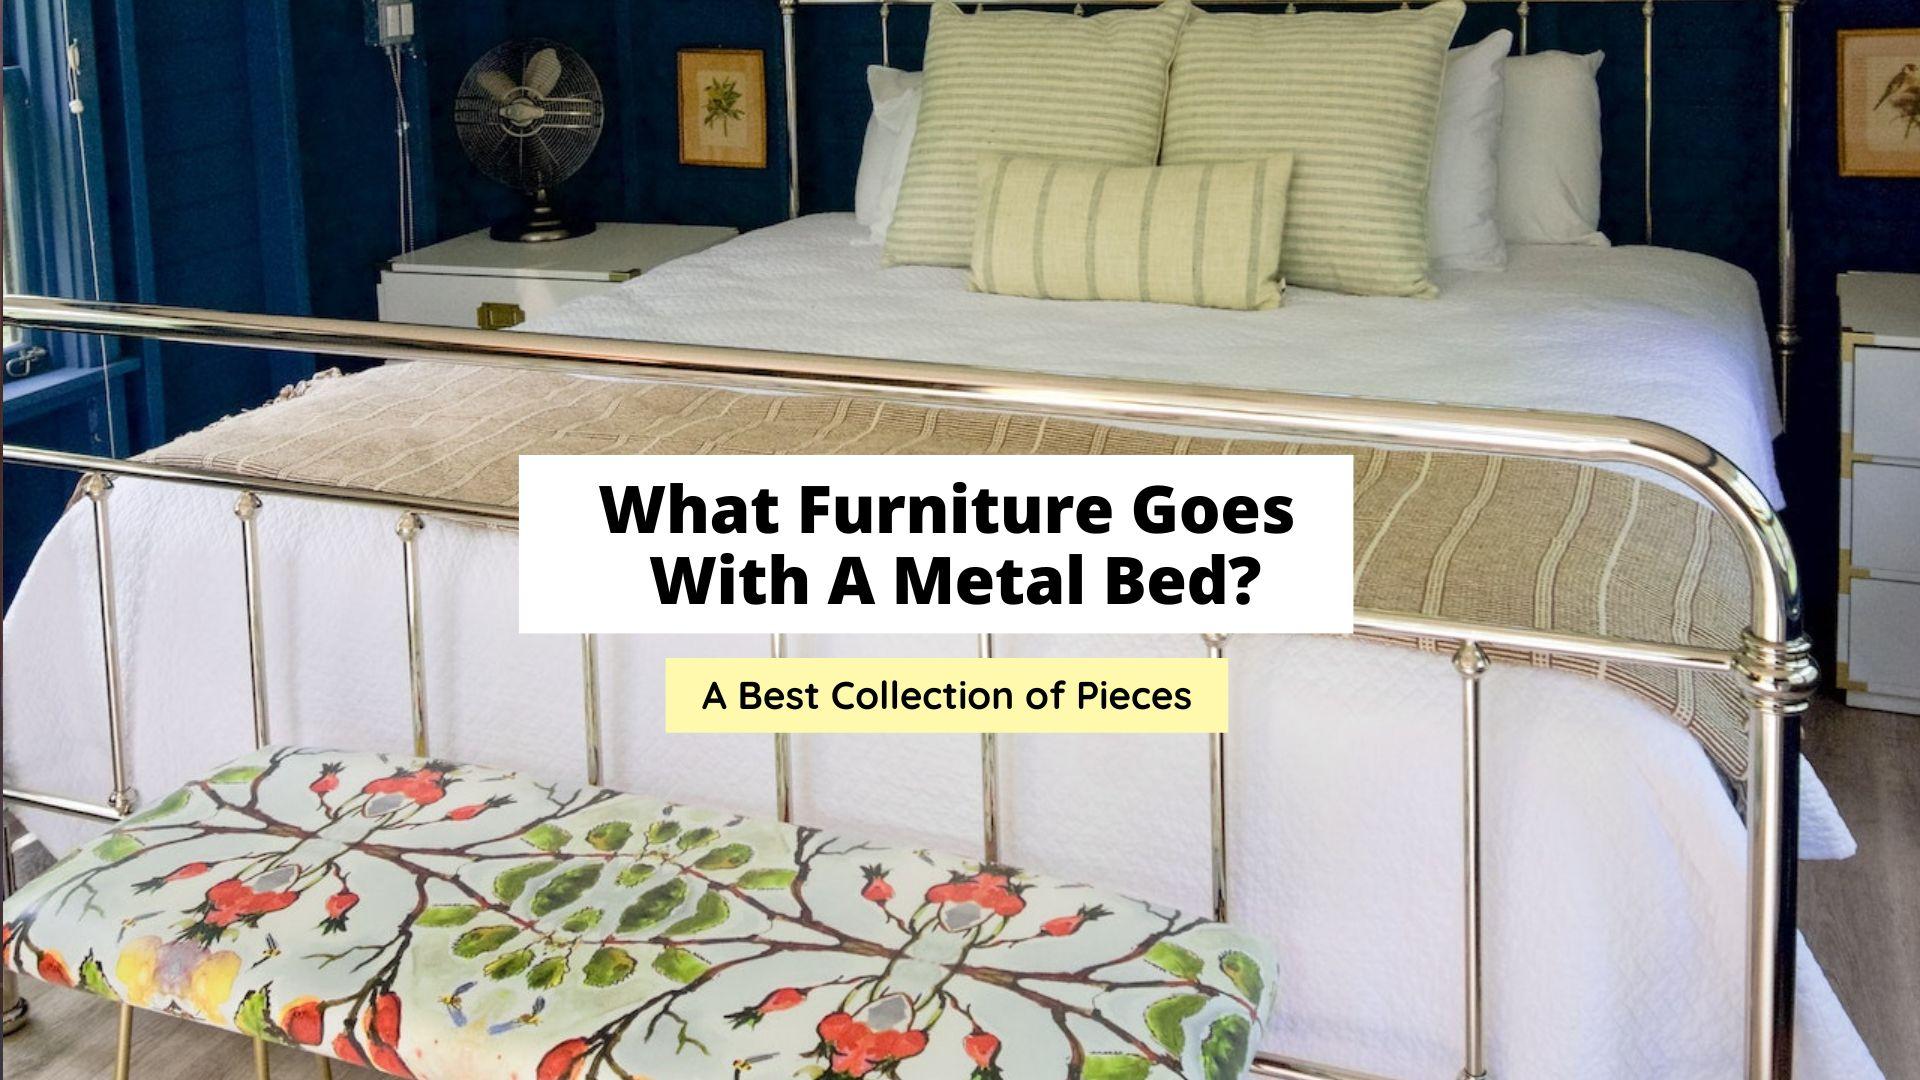 What Furniture Goes With A Metal Bed